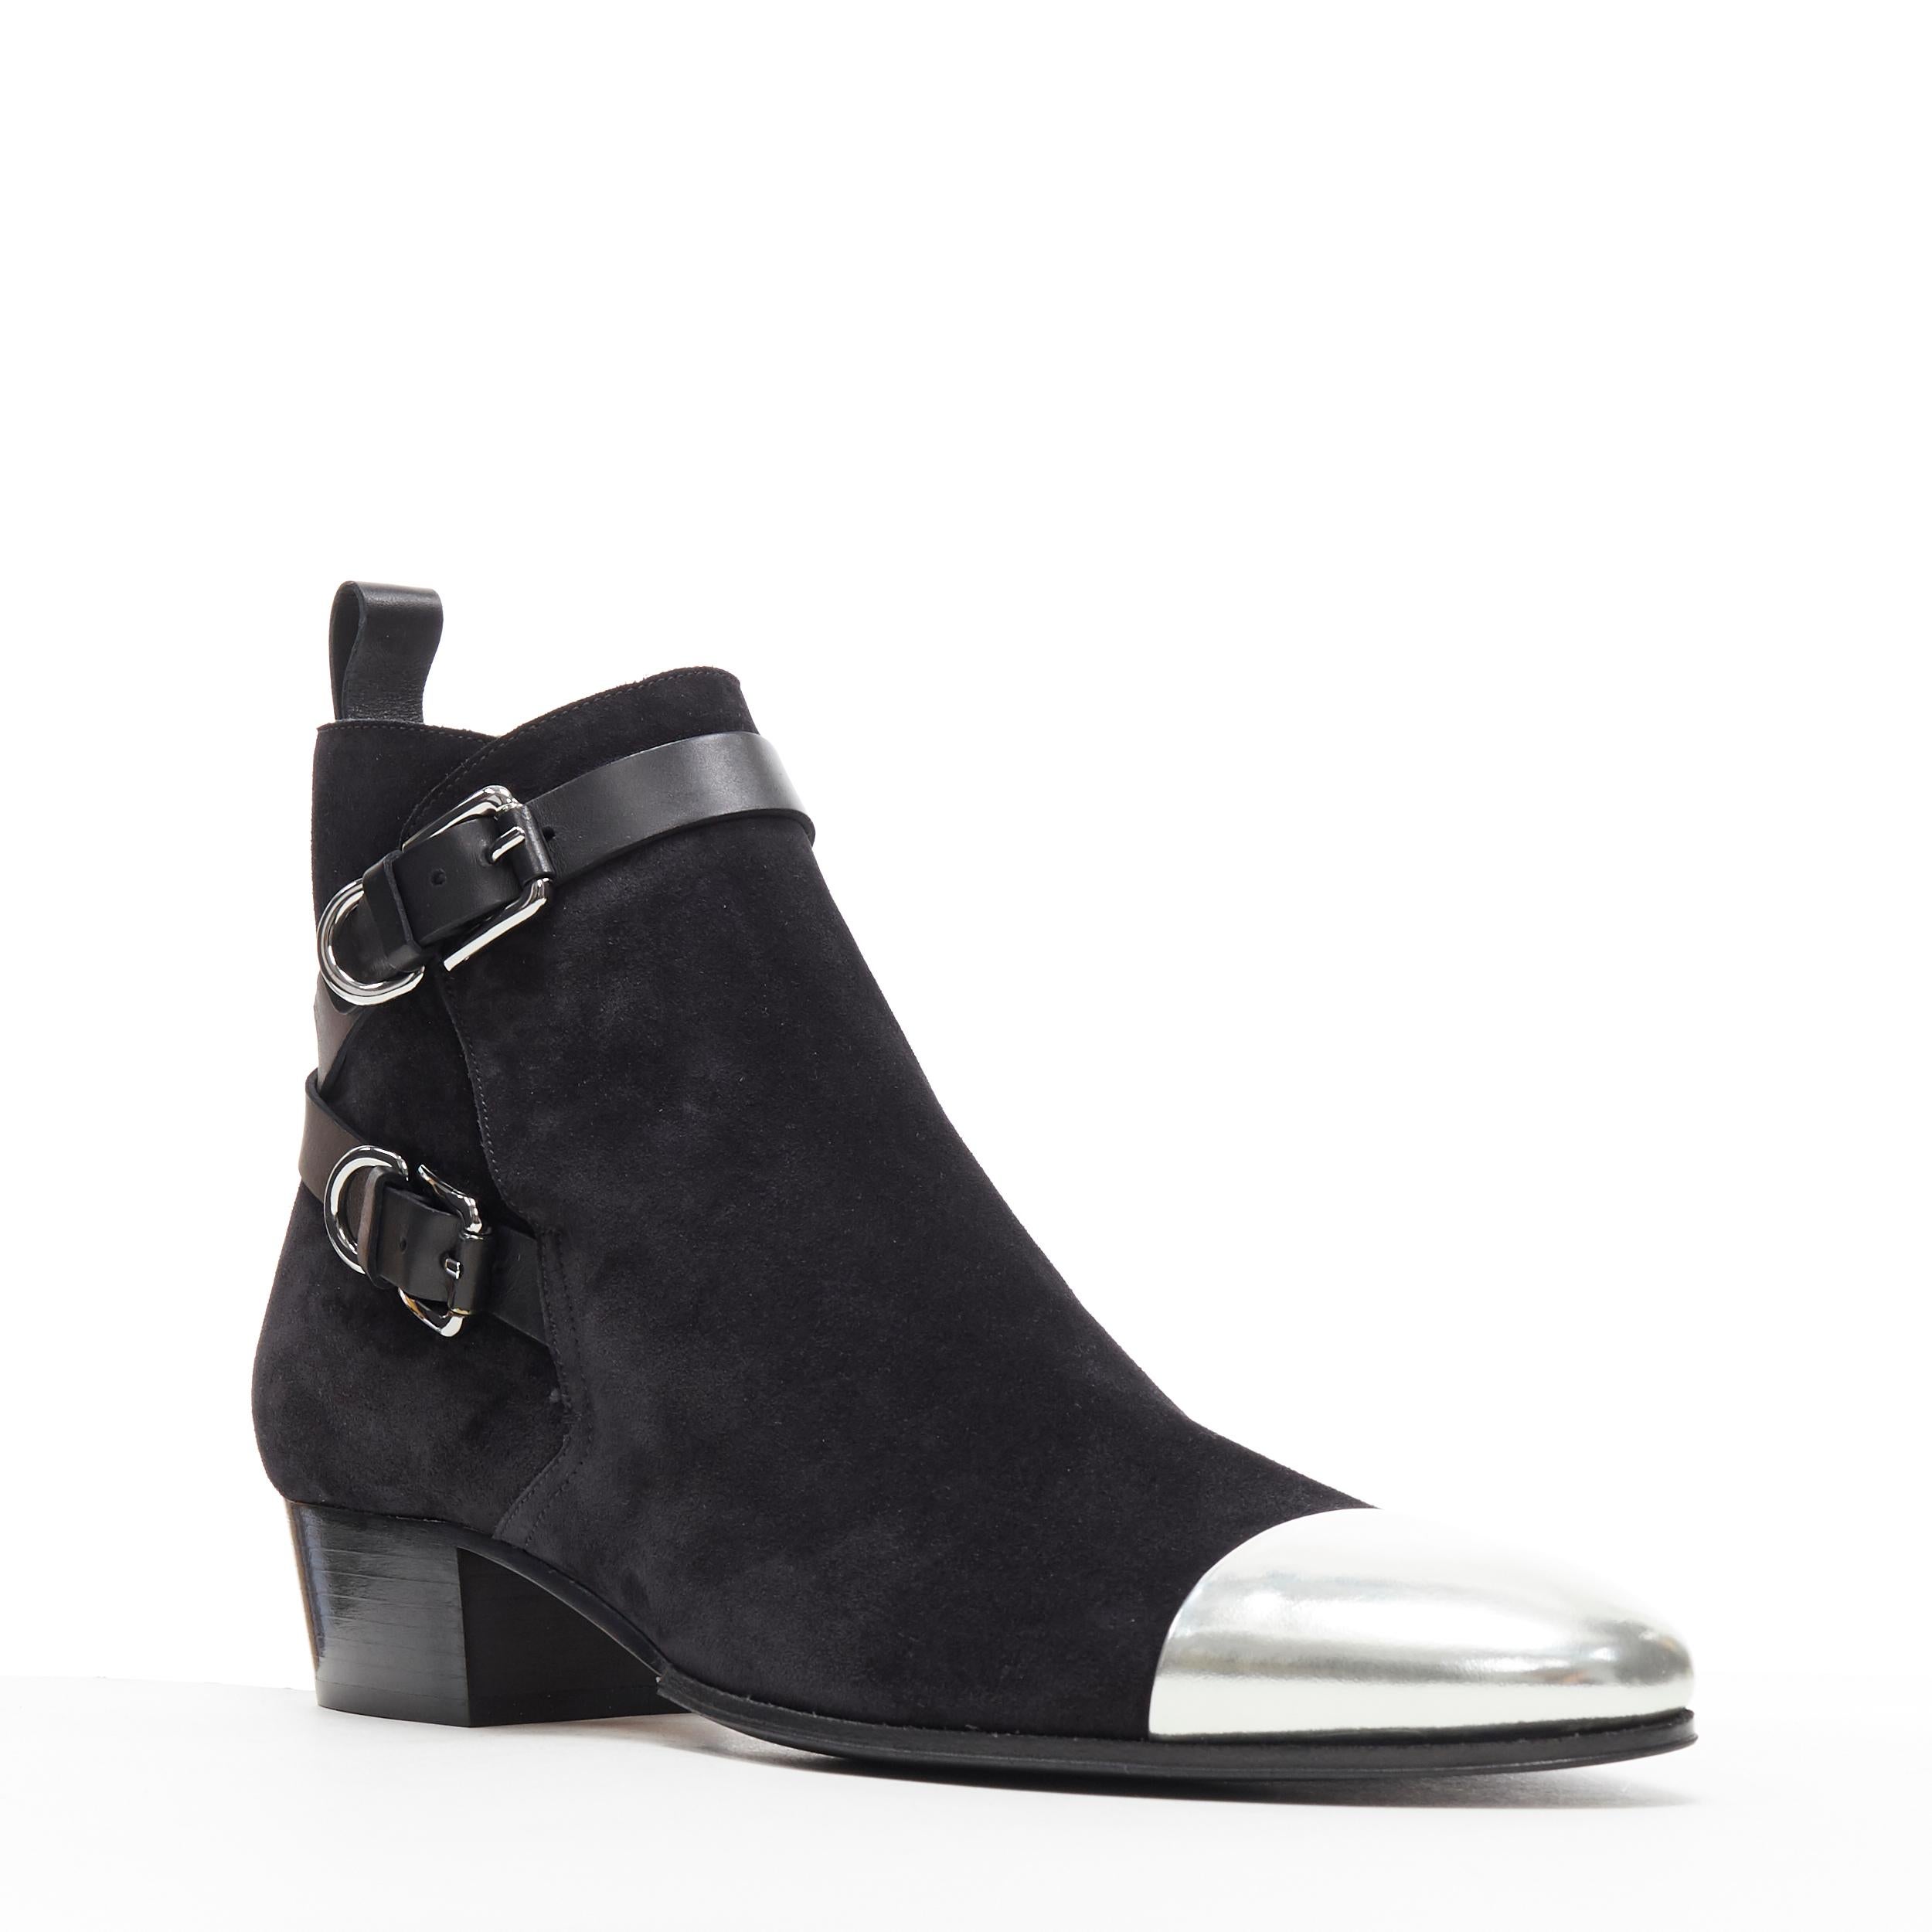 new BALMAIN black suede silver toe cap buckle anthos ankle boots shoes EU43
Brand: Balmain
Designer: Olivier Rousteing
Model Name / Style: Suede ankle boot
Material: Suede
Color: Black
Pattern: Solid
Closure: Buckle
Extra Detail: Black genuine suede